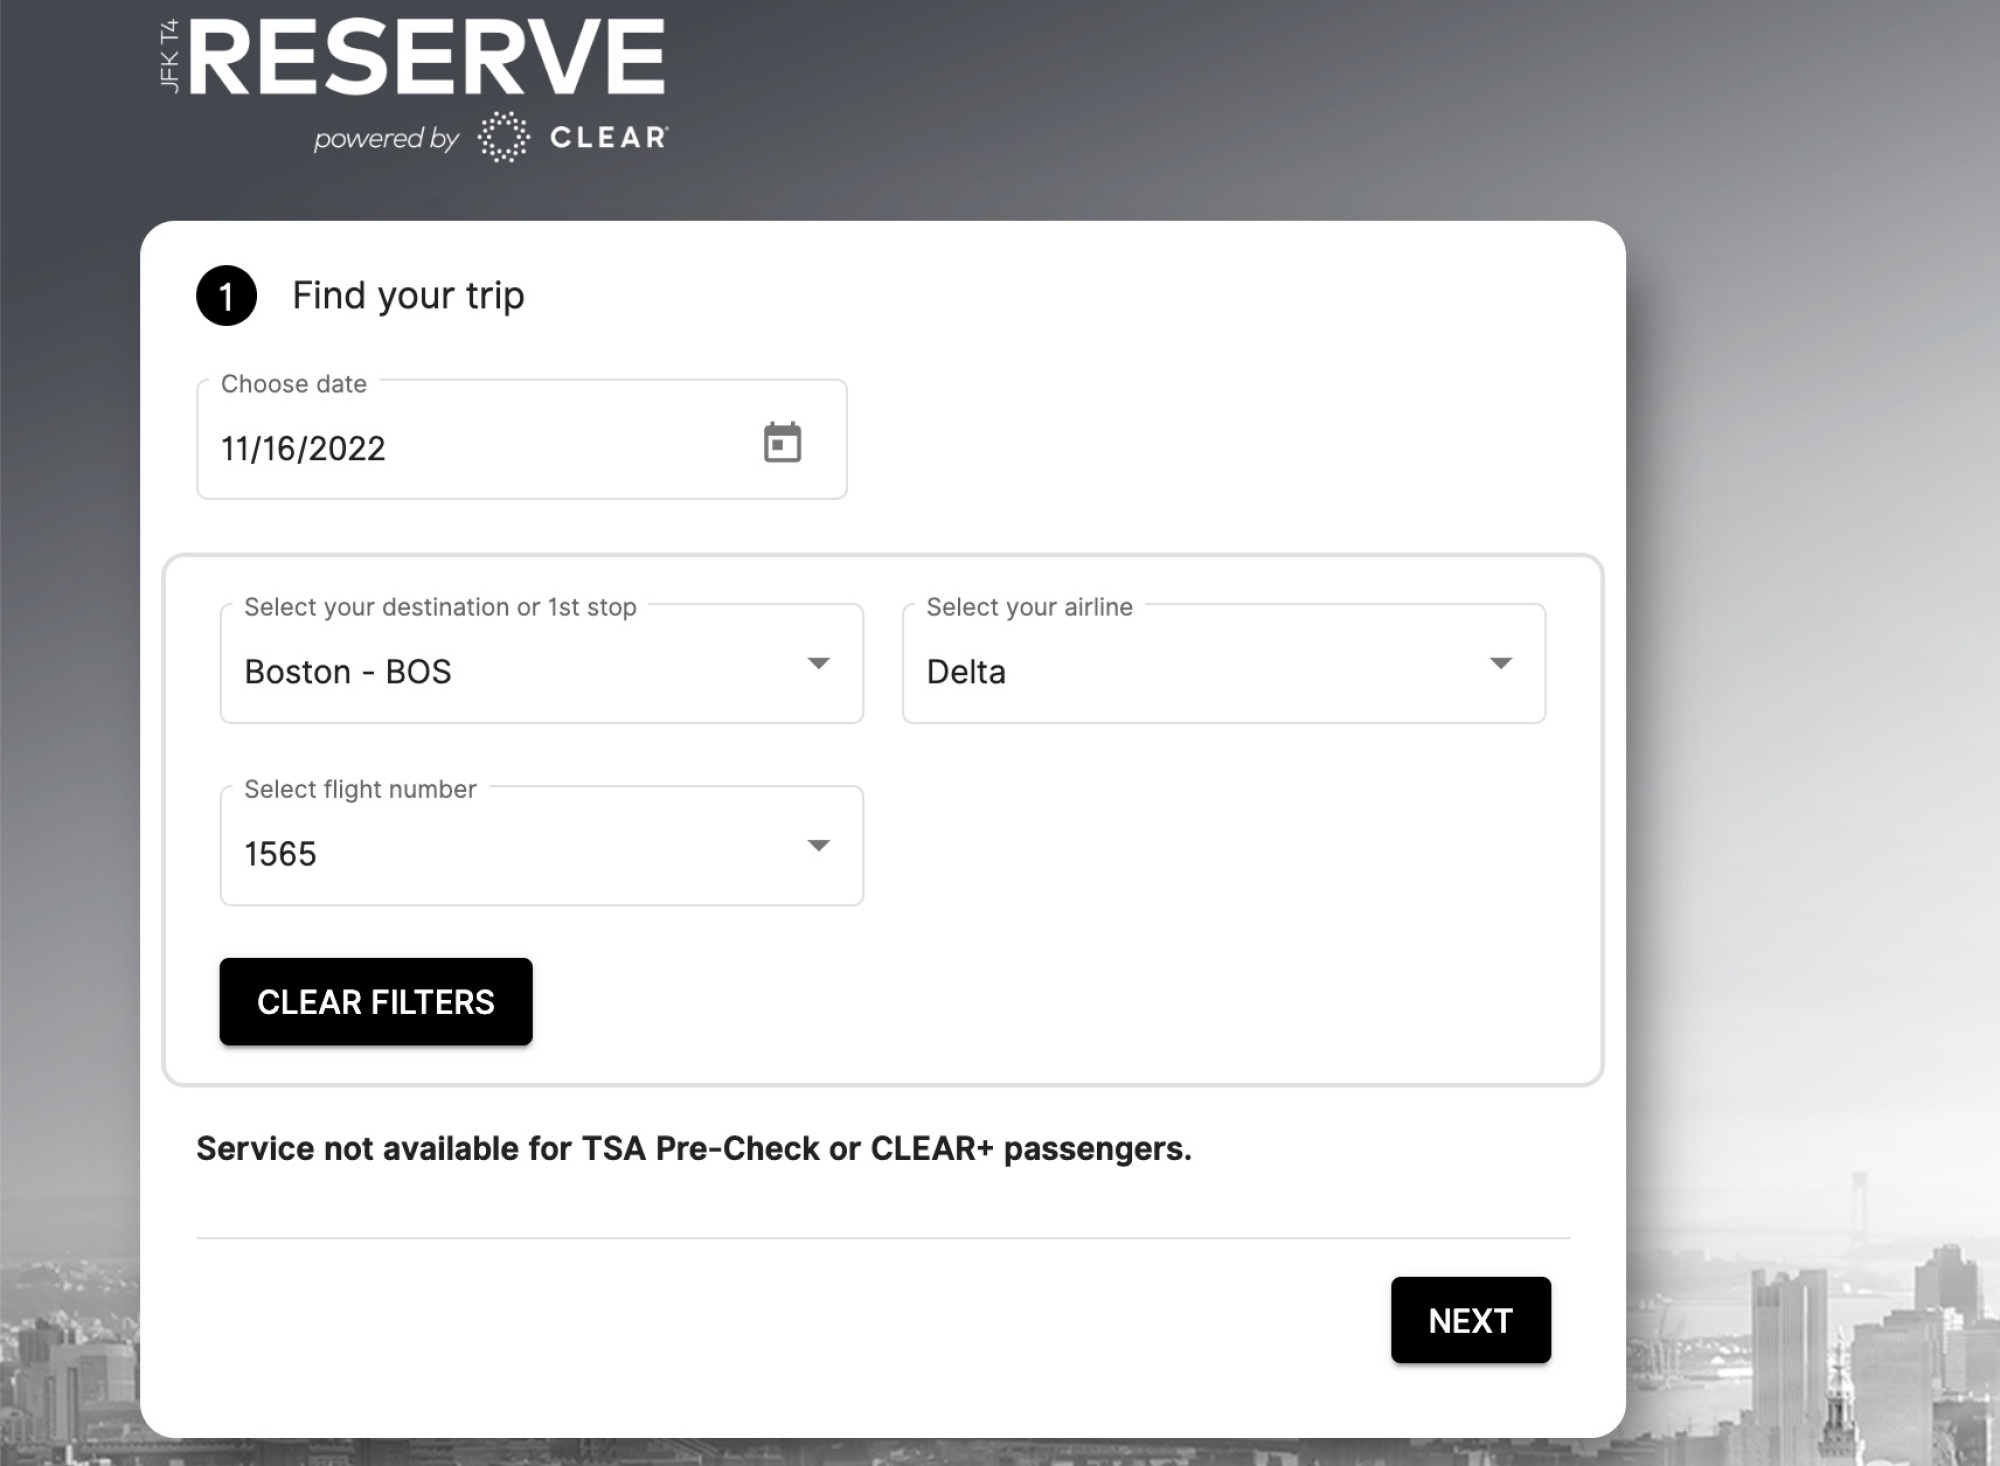 Screen showing form to find your flight info through the Reserve tool